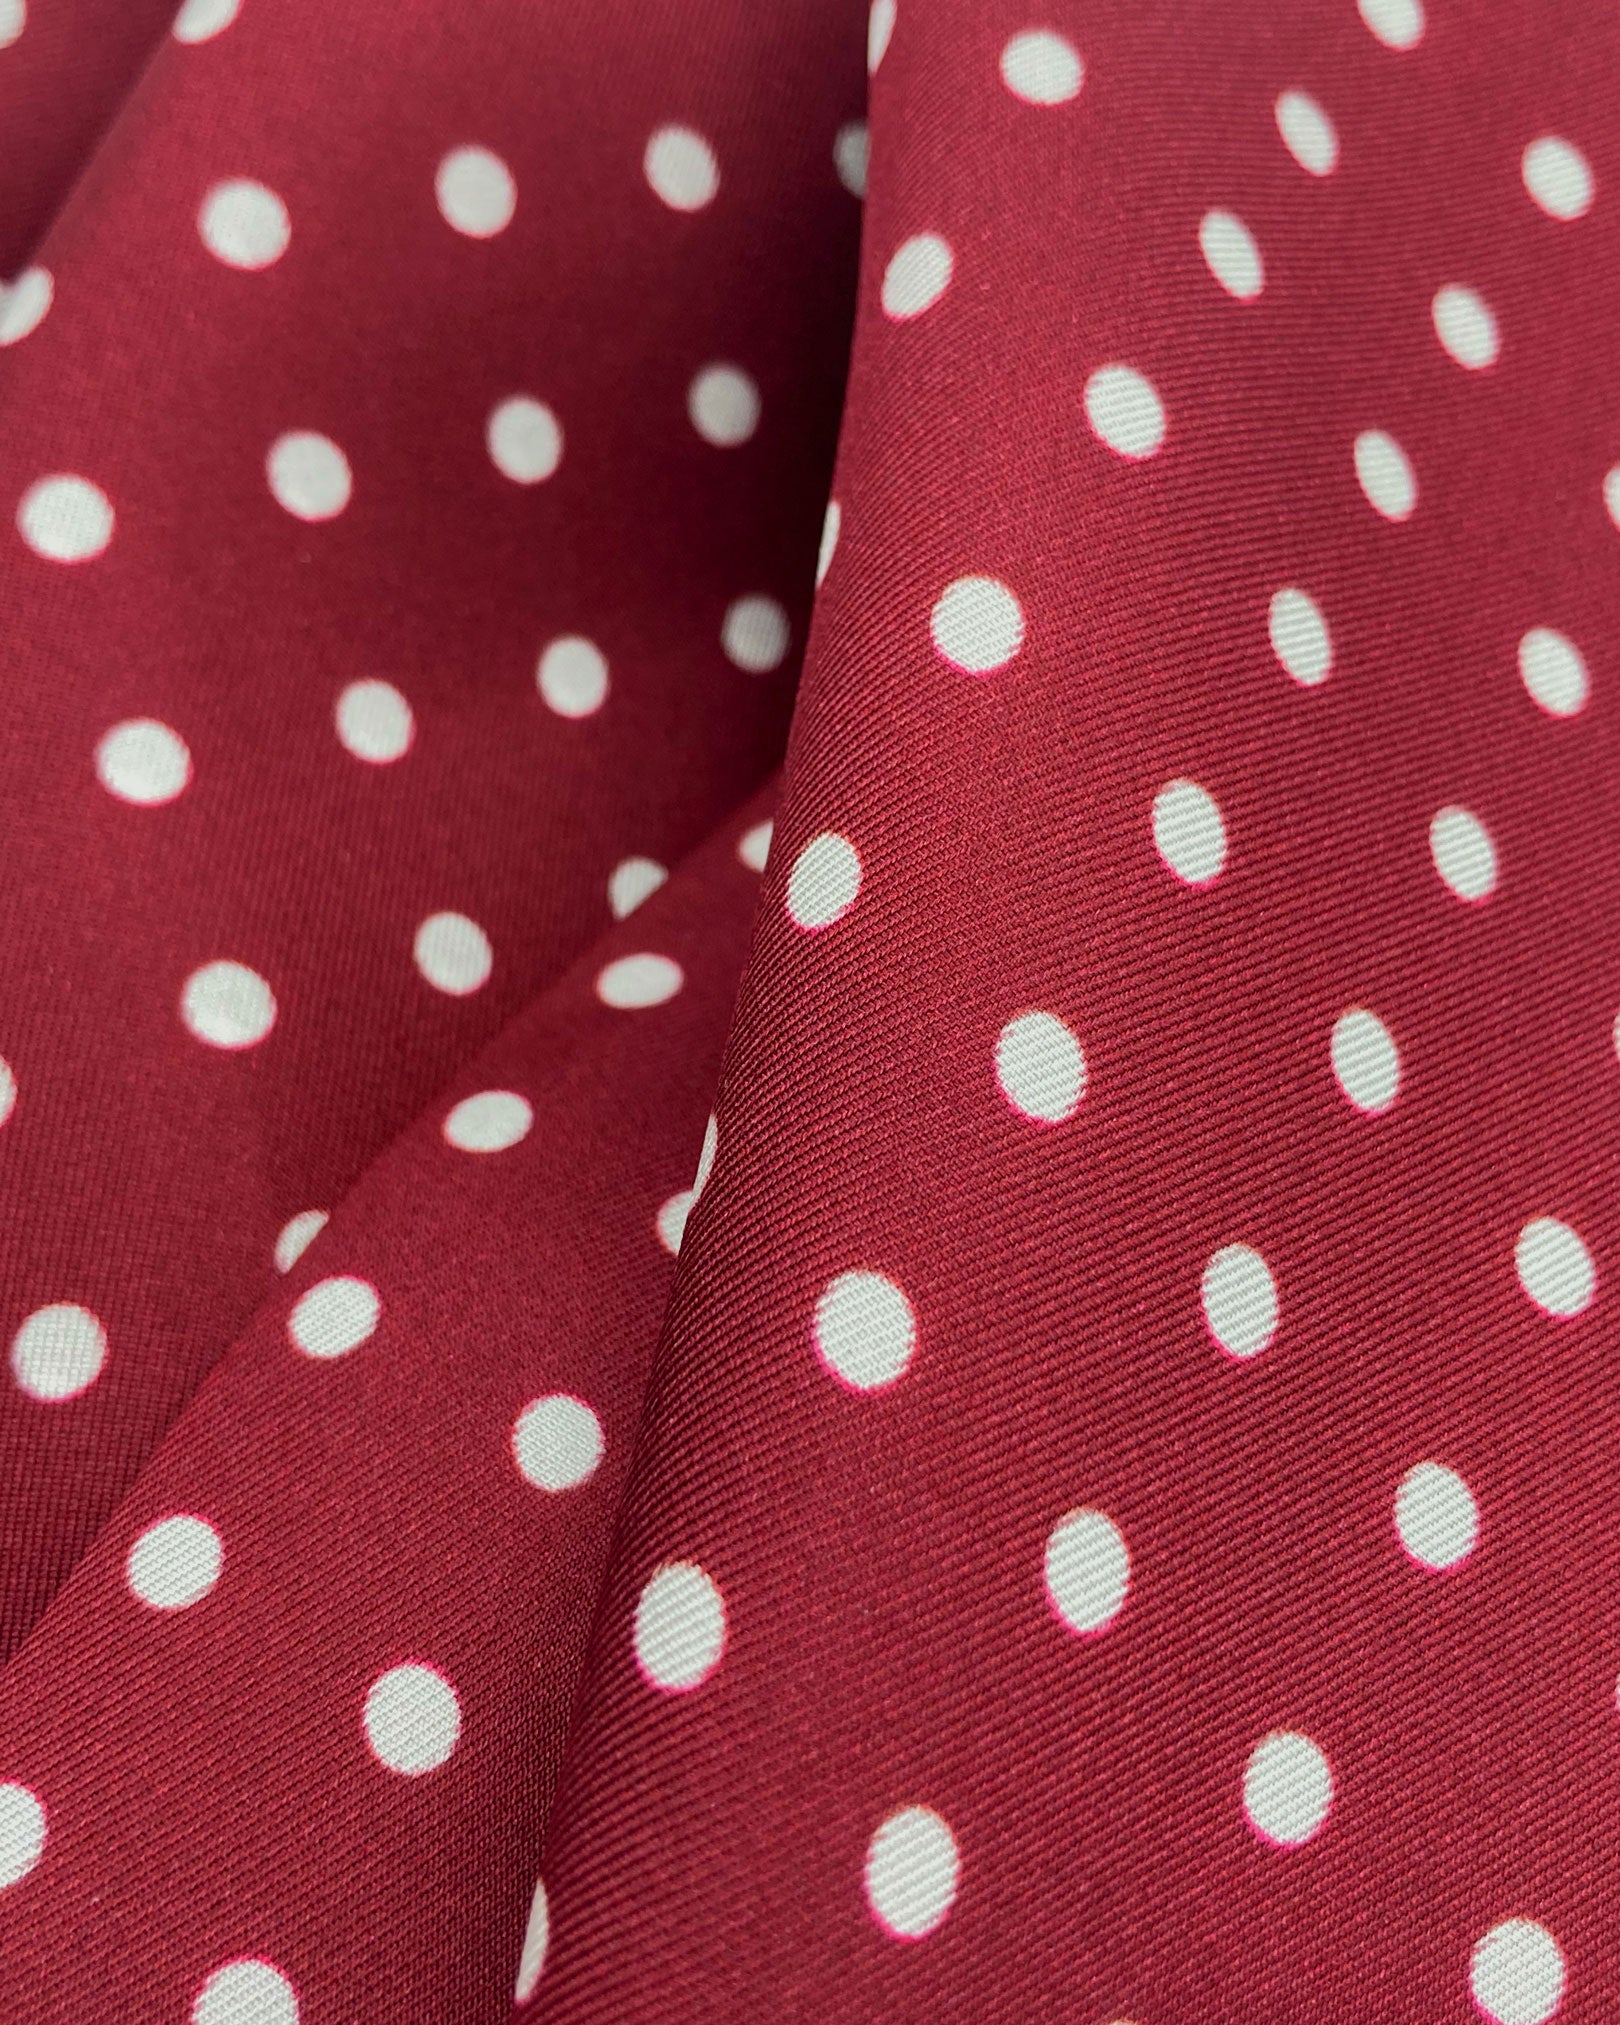 Ruffled close-up view of the Sapporo silk scarf, presenting a closer view of the polka dot design in deep maroon with white dots and appealing lustre of the material.